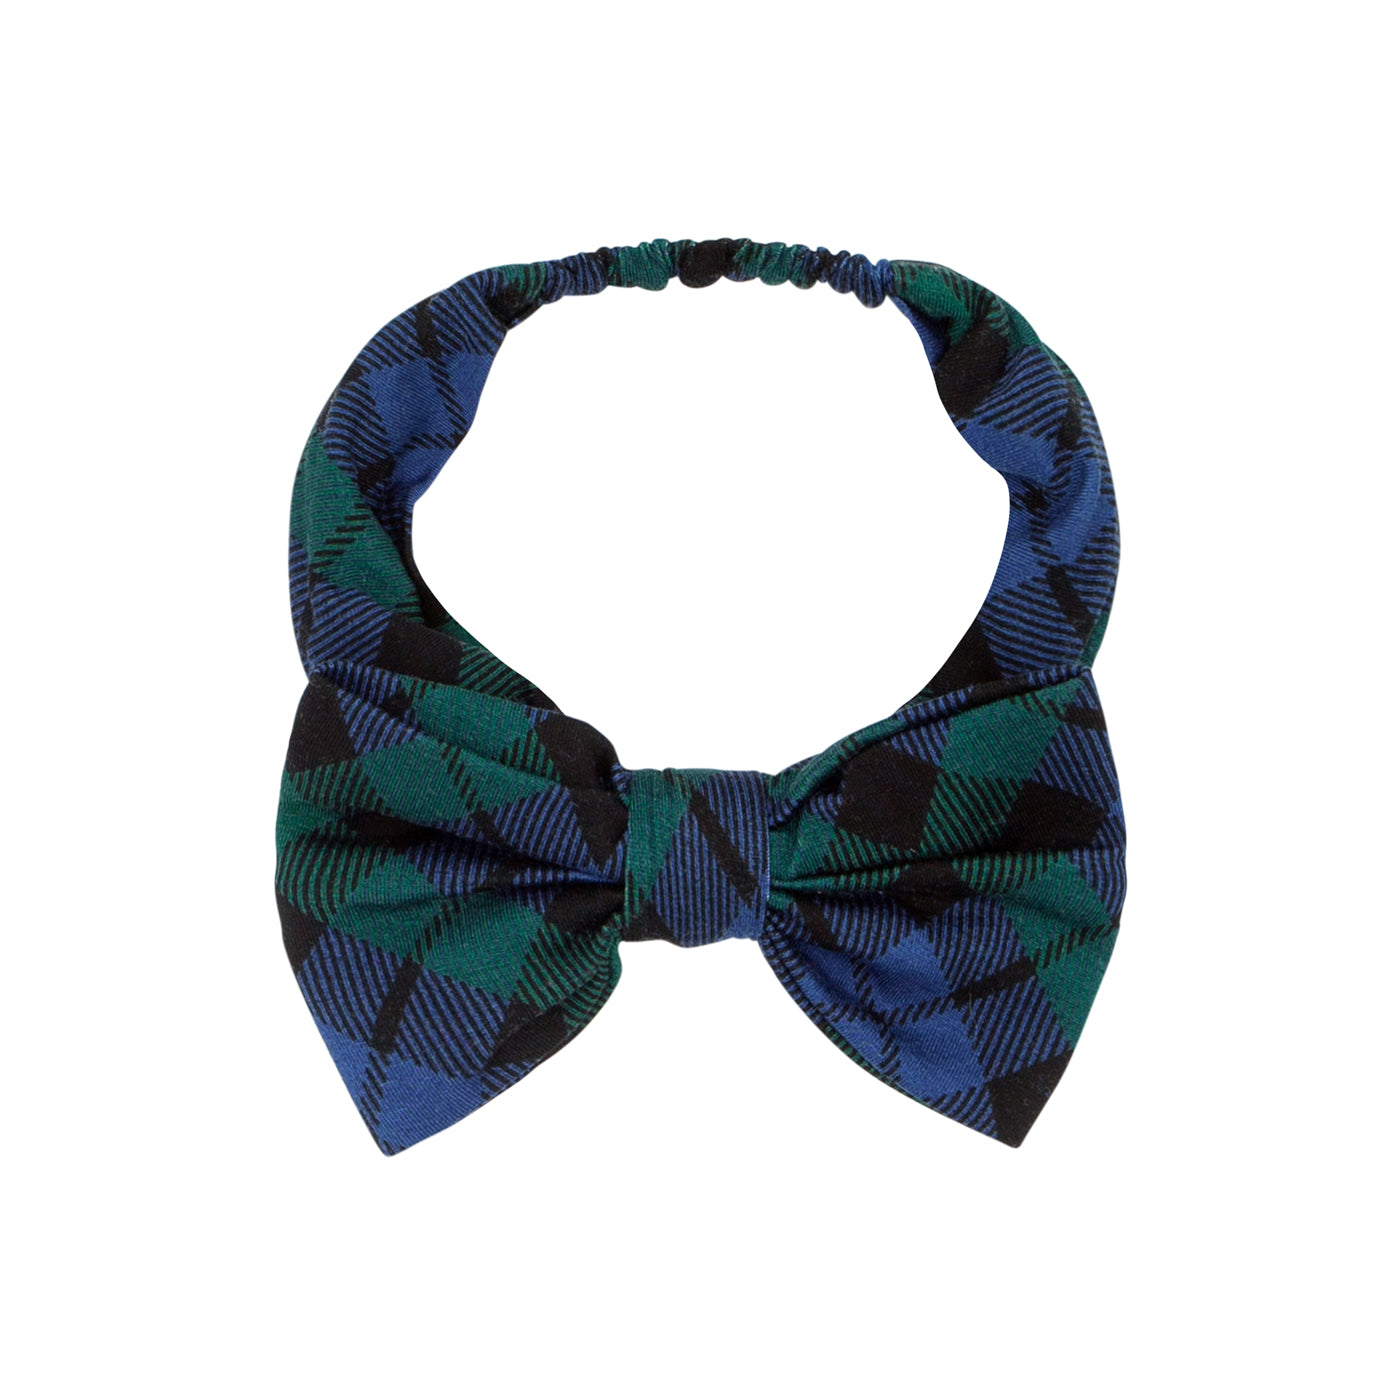 Alternate flat lay image of an Emerald Plaid luxe bow headband